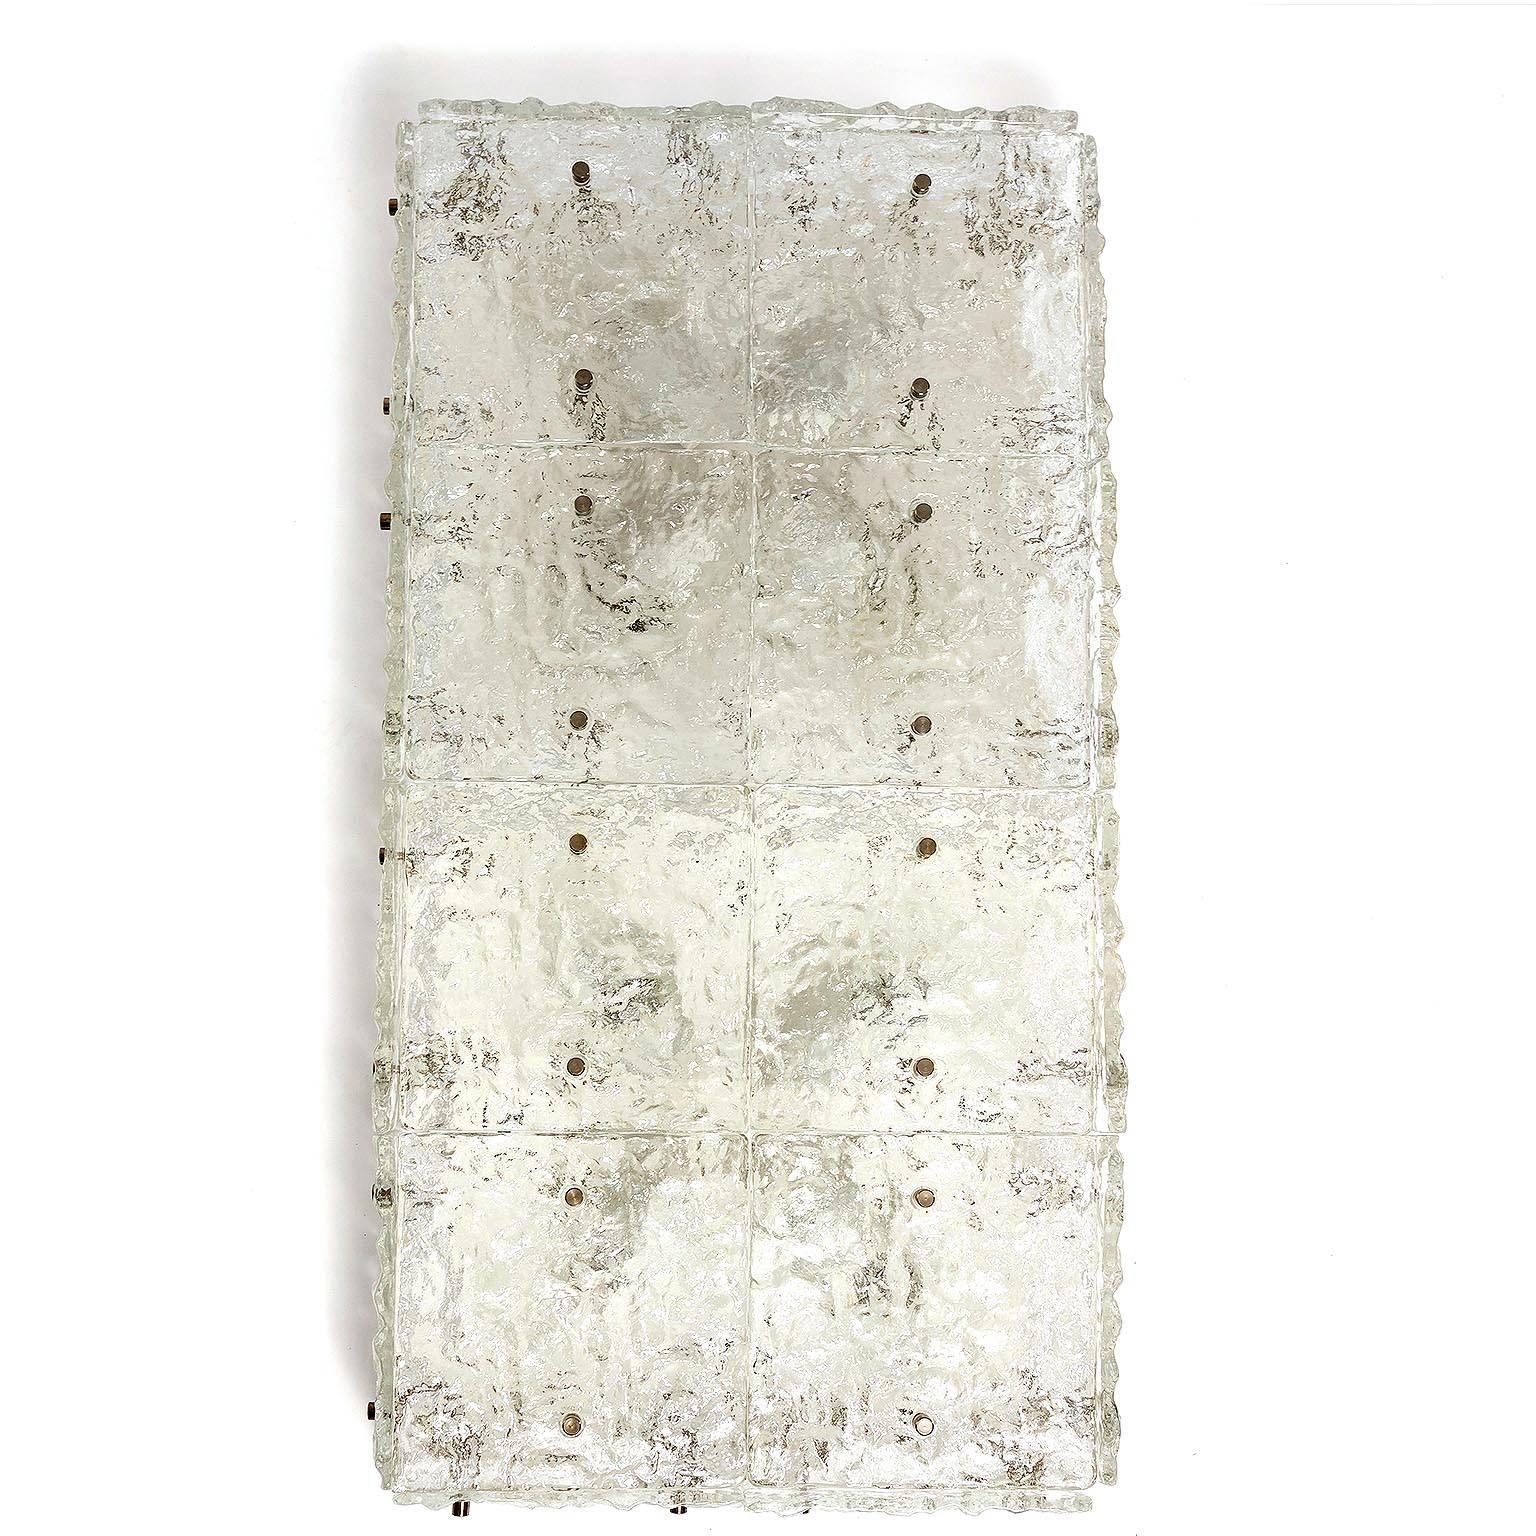 A large flush mount or wall light fixture modell 'Dachstein' by Kalmar, Austria, manufactured in Mid-Century, circa 1970 (late 1960s and early 1970s). 
Frosted and textured glass elements are mounted with chrome or nickel bolts on a white metal